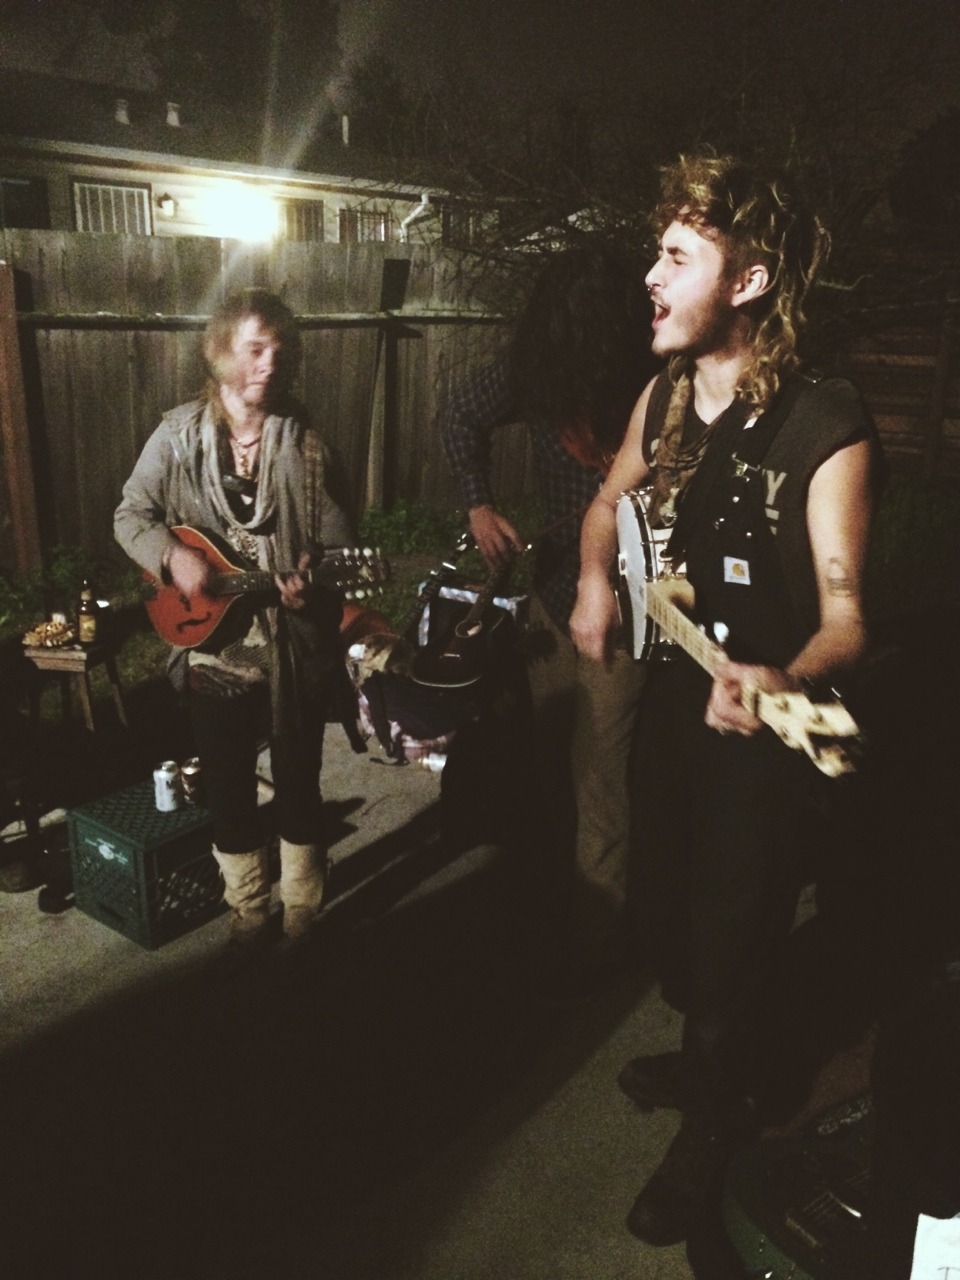 filthcity:  Booked an impromptu show in Oakland last night for my buddies, cousin